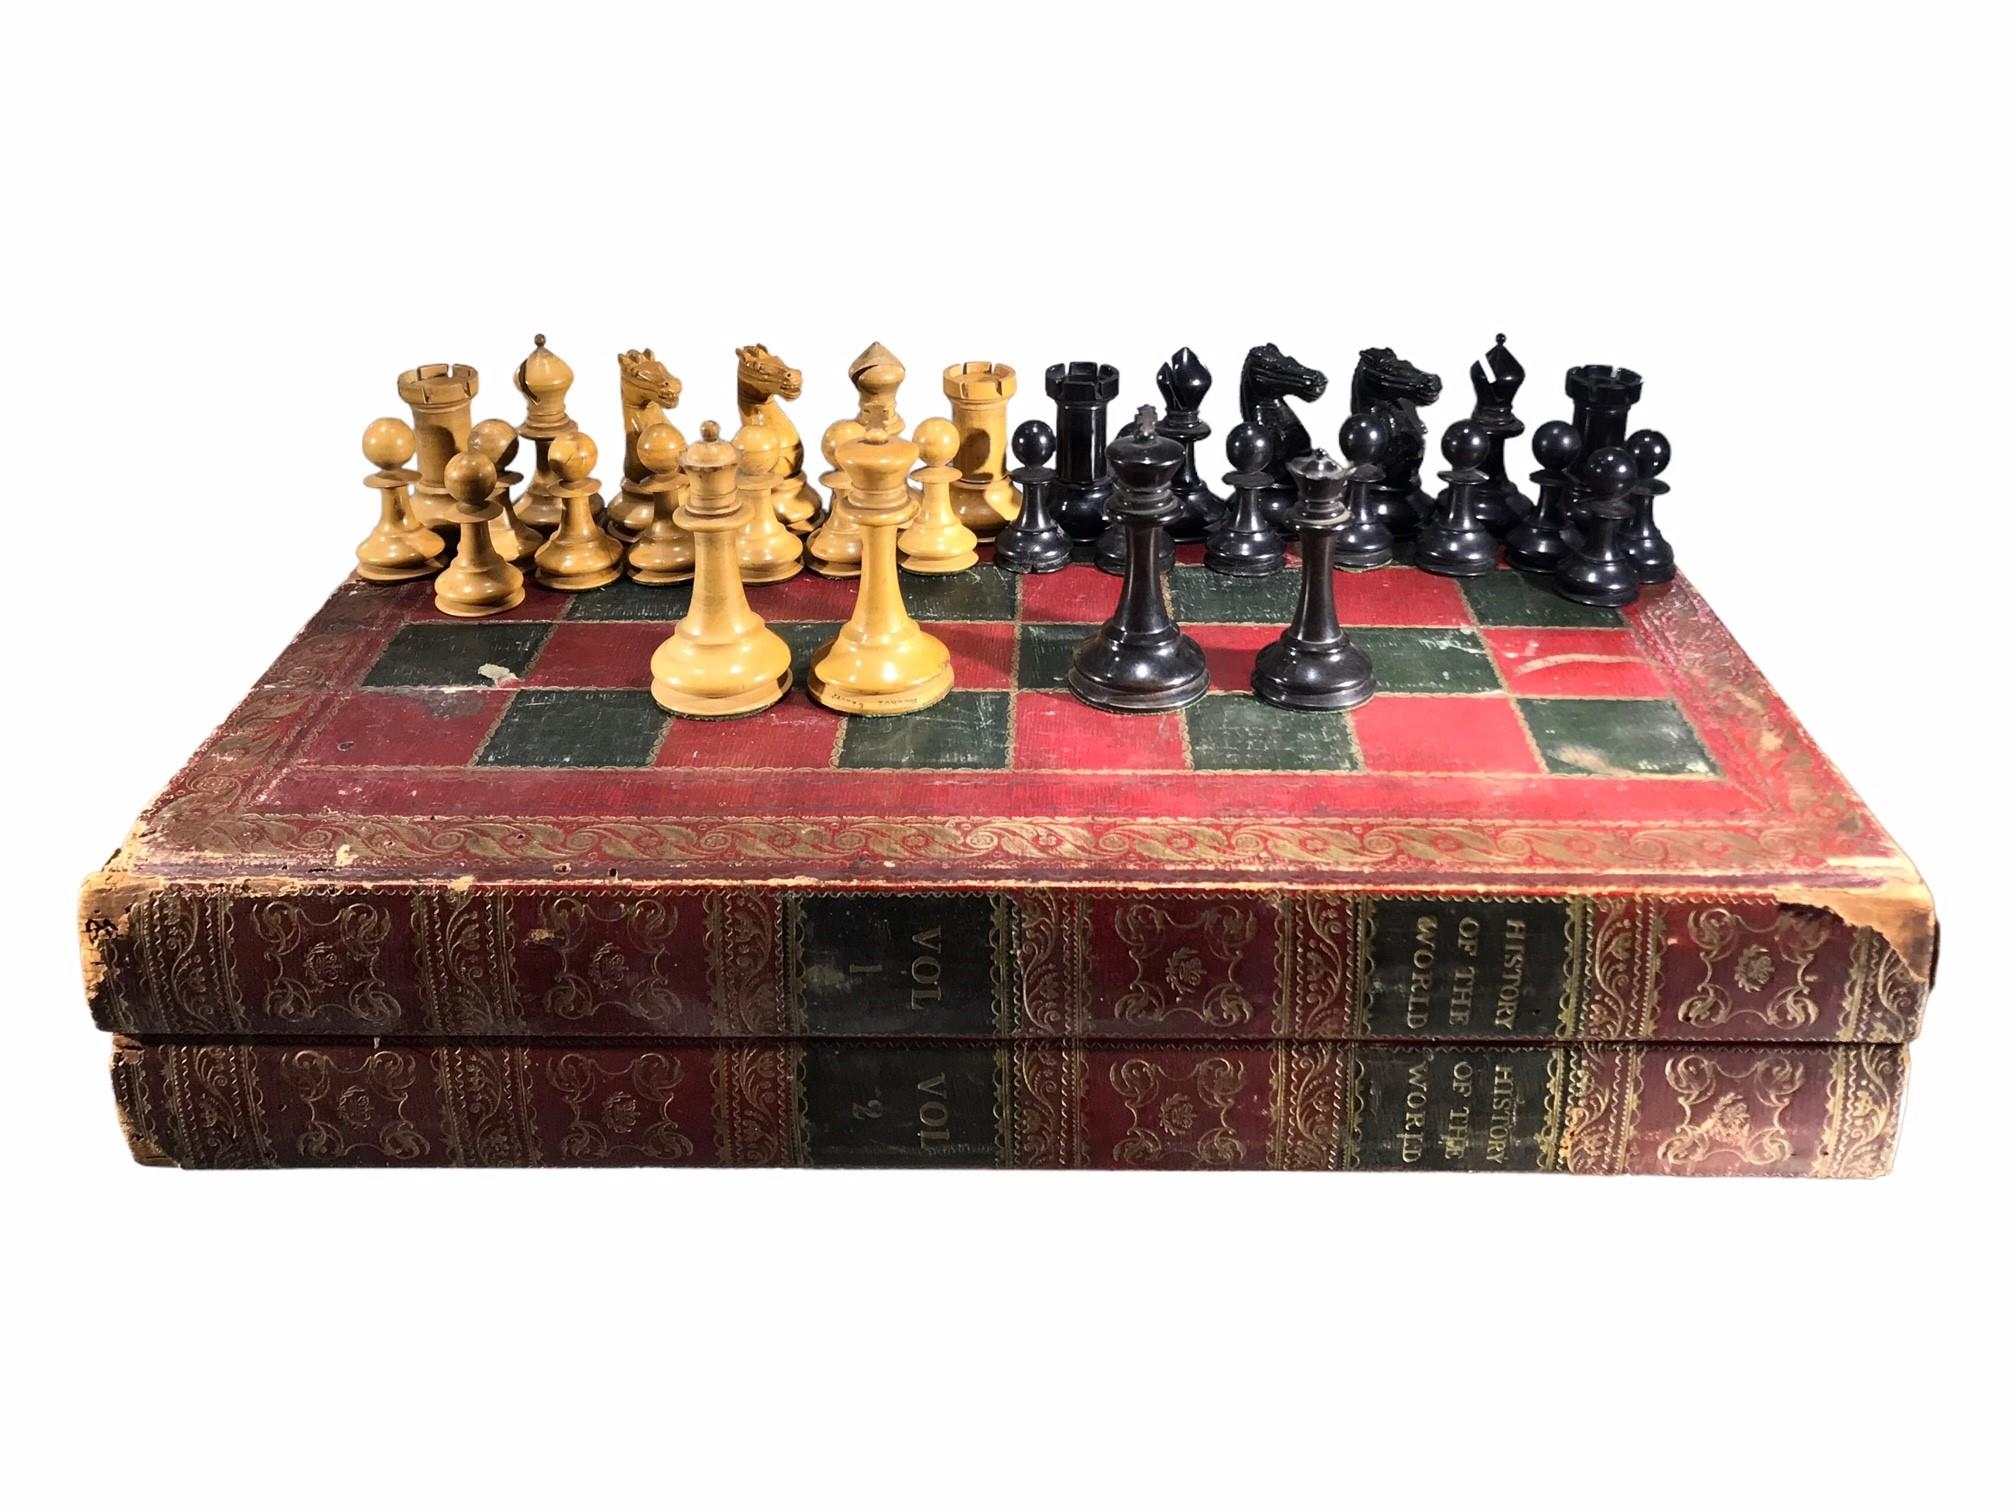 JAQUES OF LONDON, AN EARLY 20TH CENTURY CARVED WOODEN CHESS SET Housed in a novelty book chess